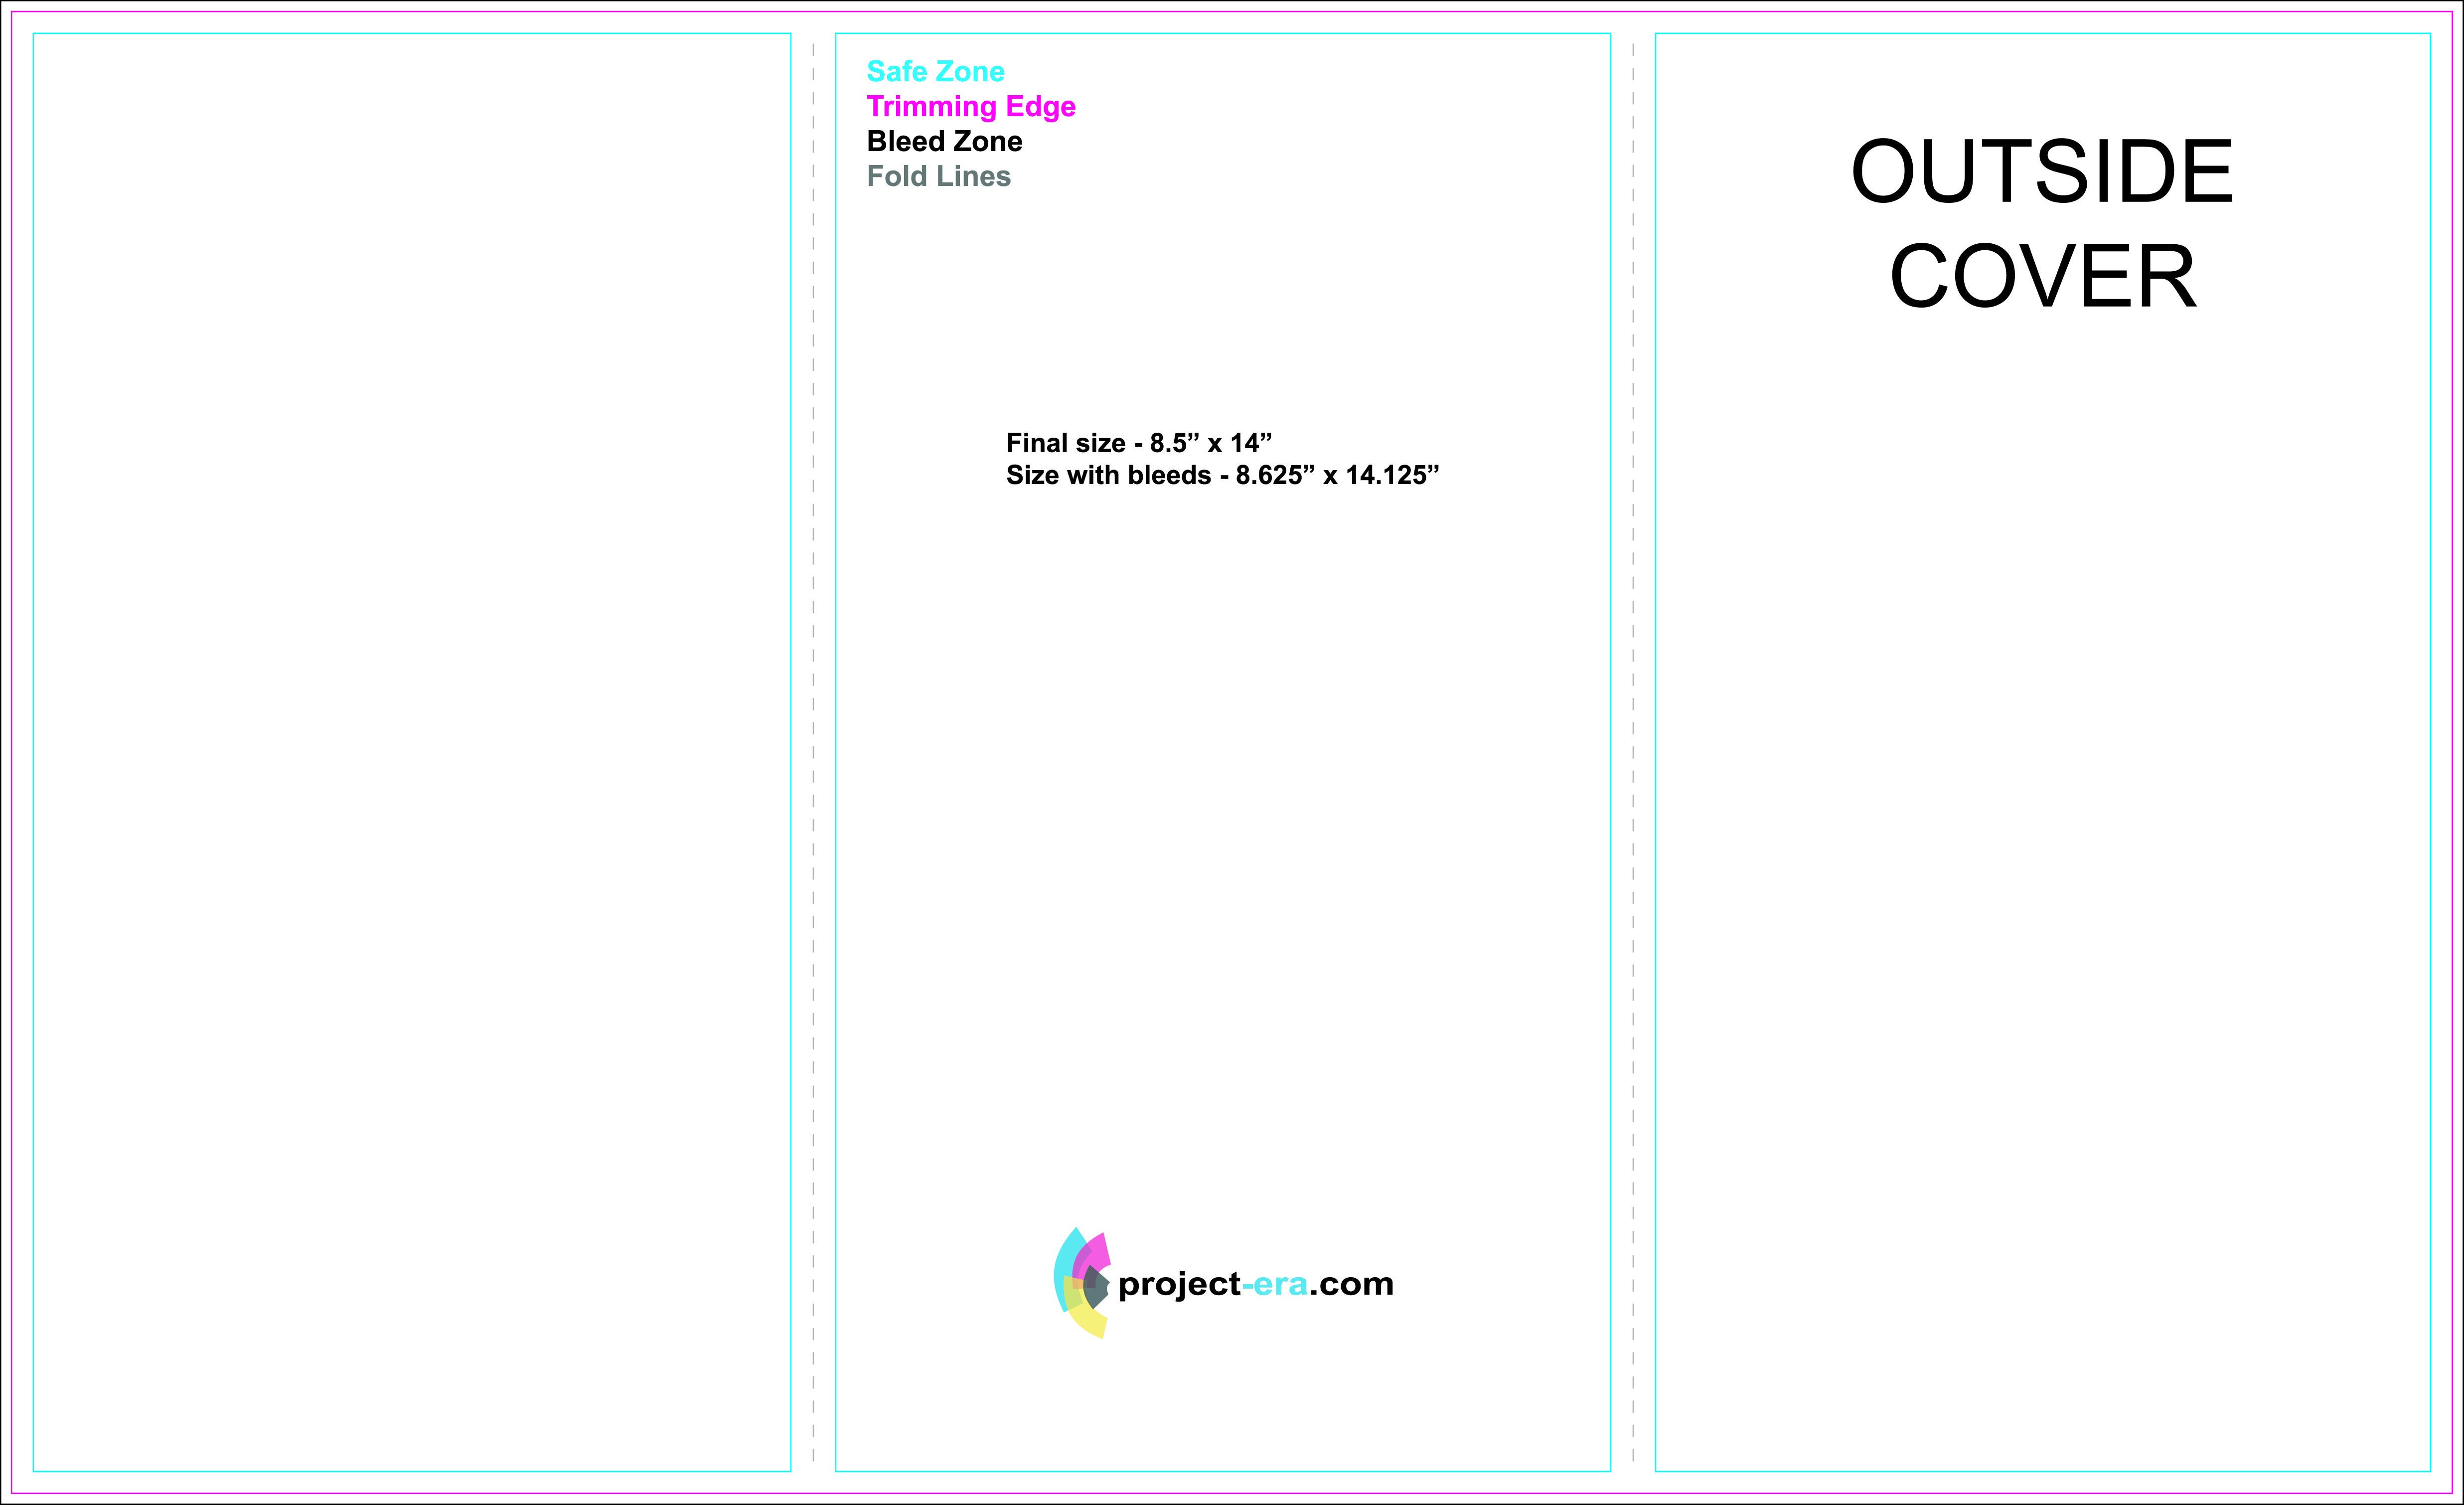 Free Tri Fold Brochure Templates based on 8 5" x 14" paper